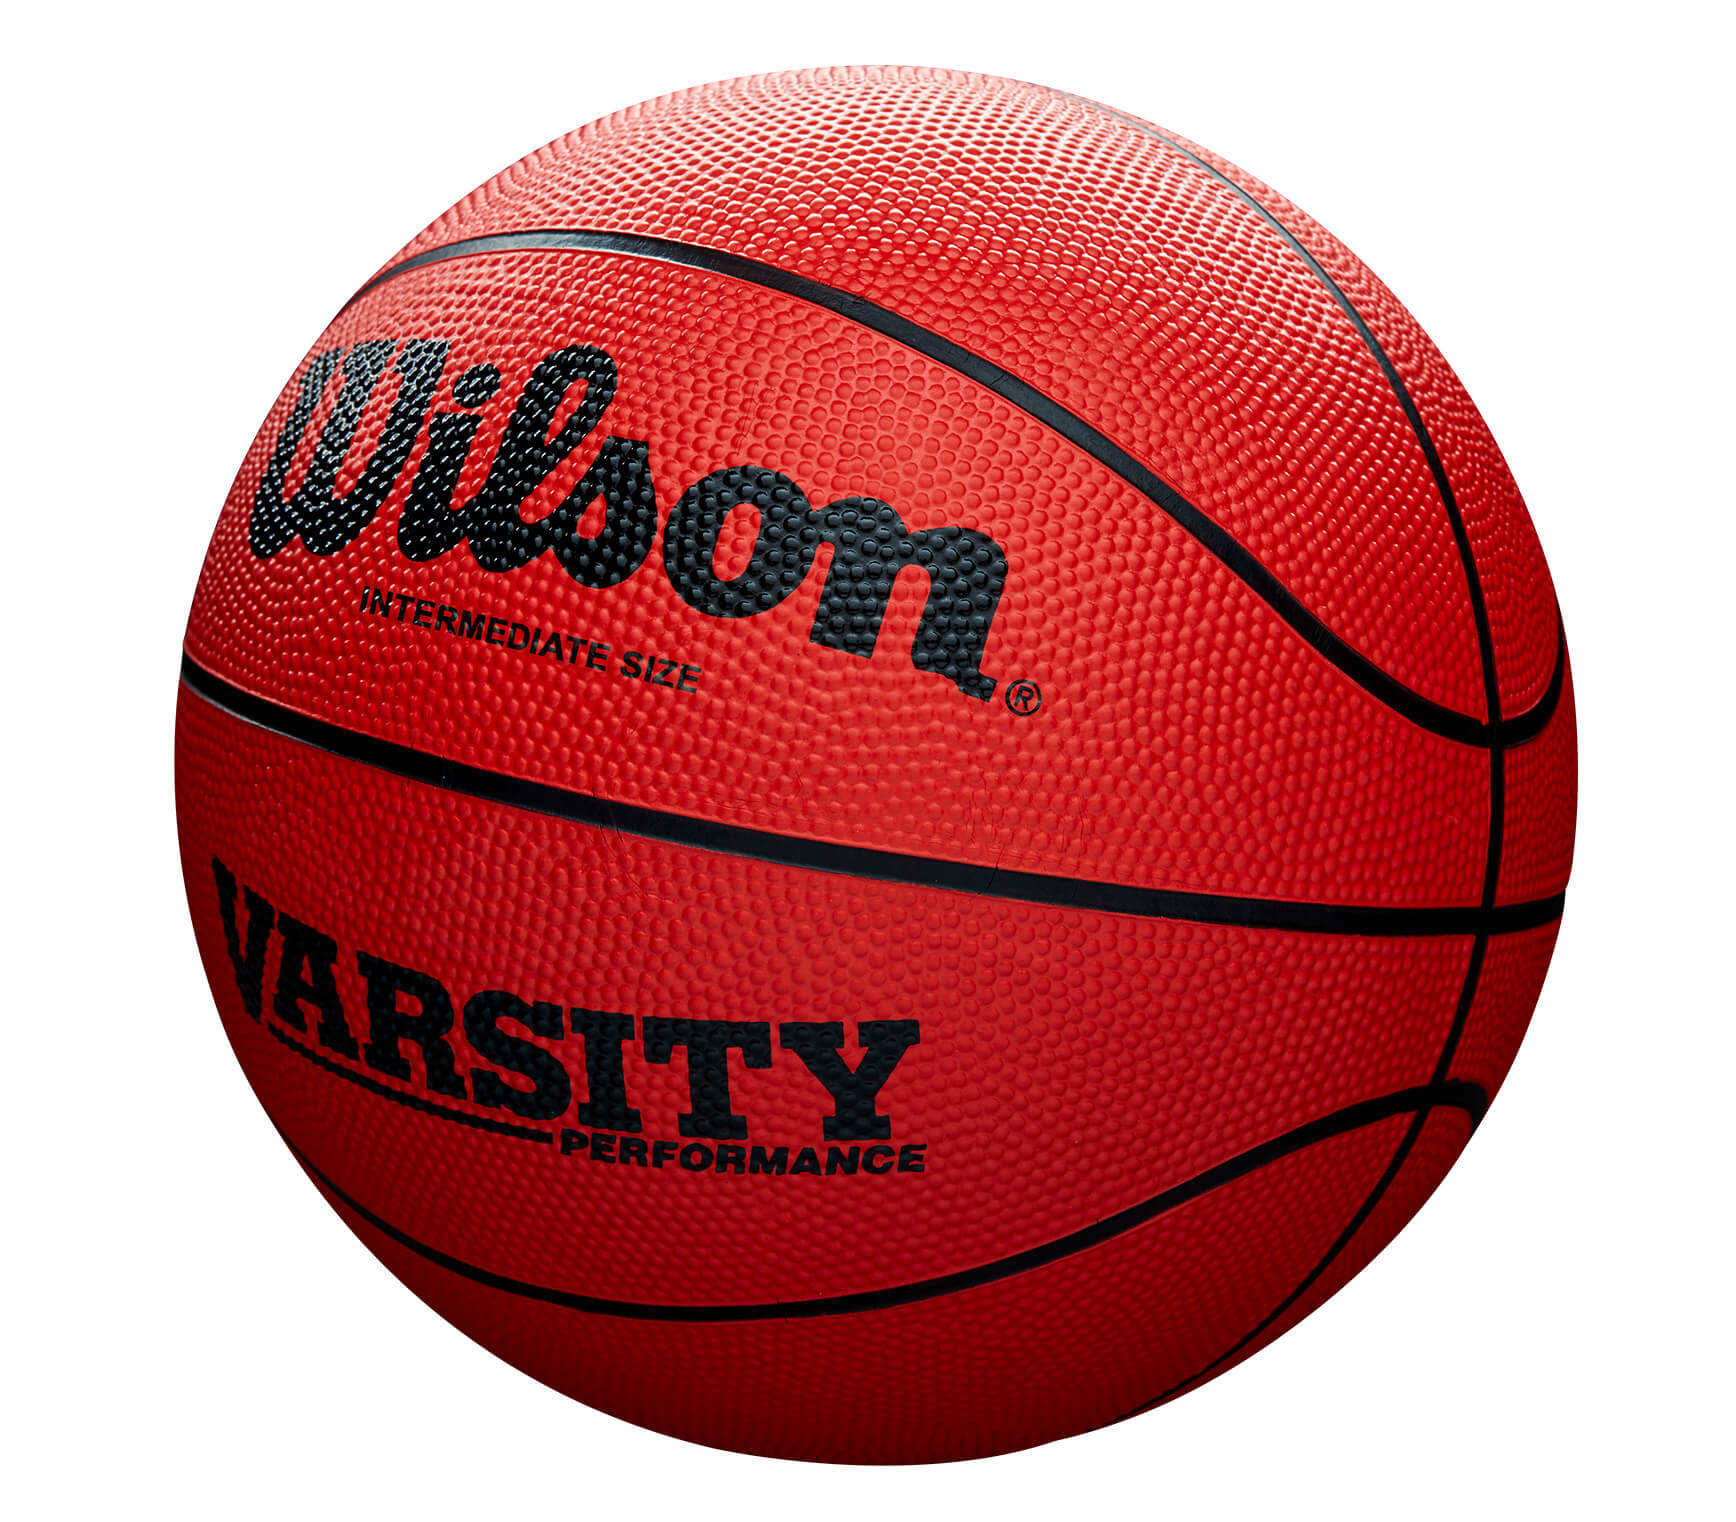 Wilson Varsity Rubber Basketball - Size 6 - Basketball - Discontinued